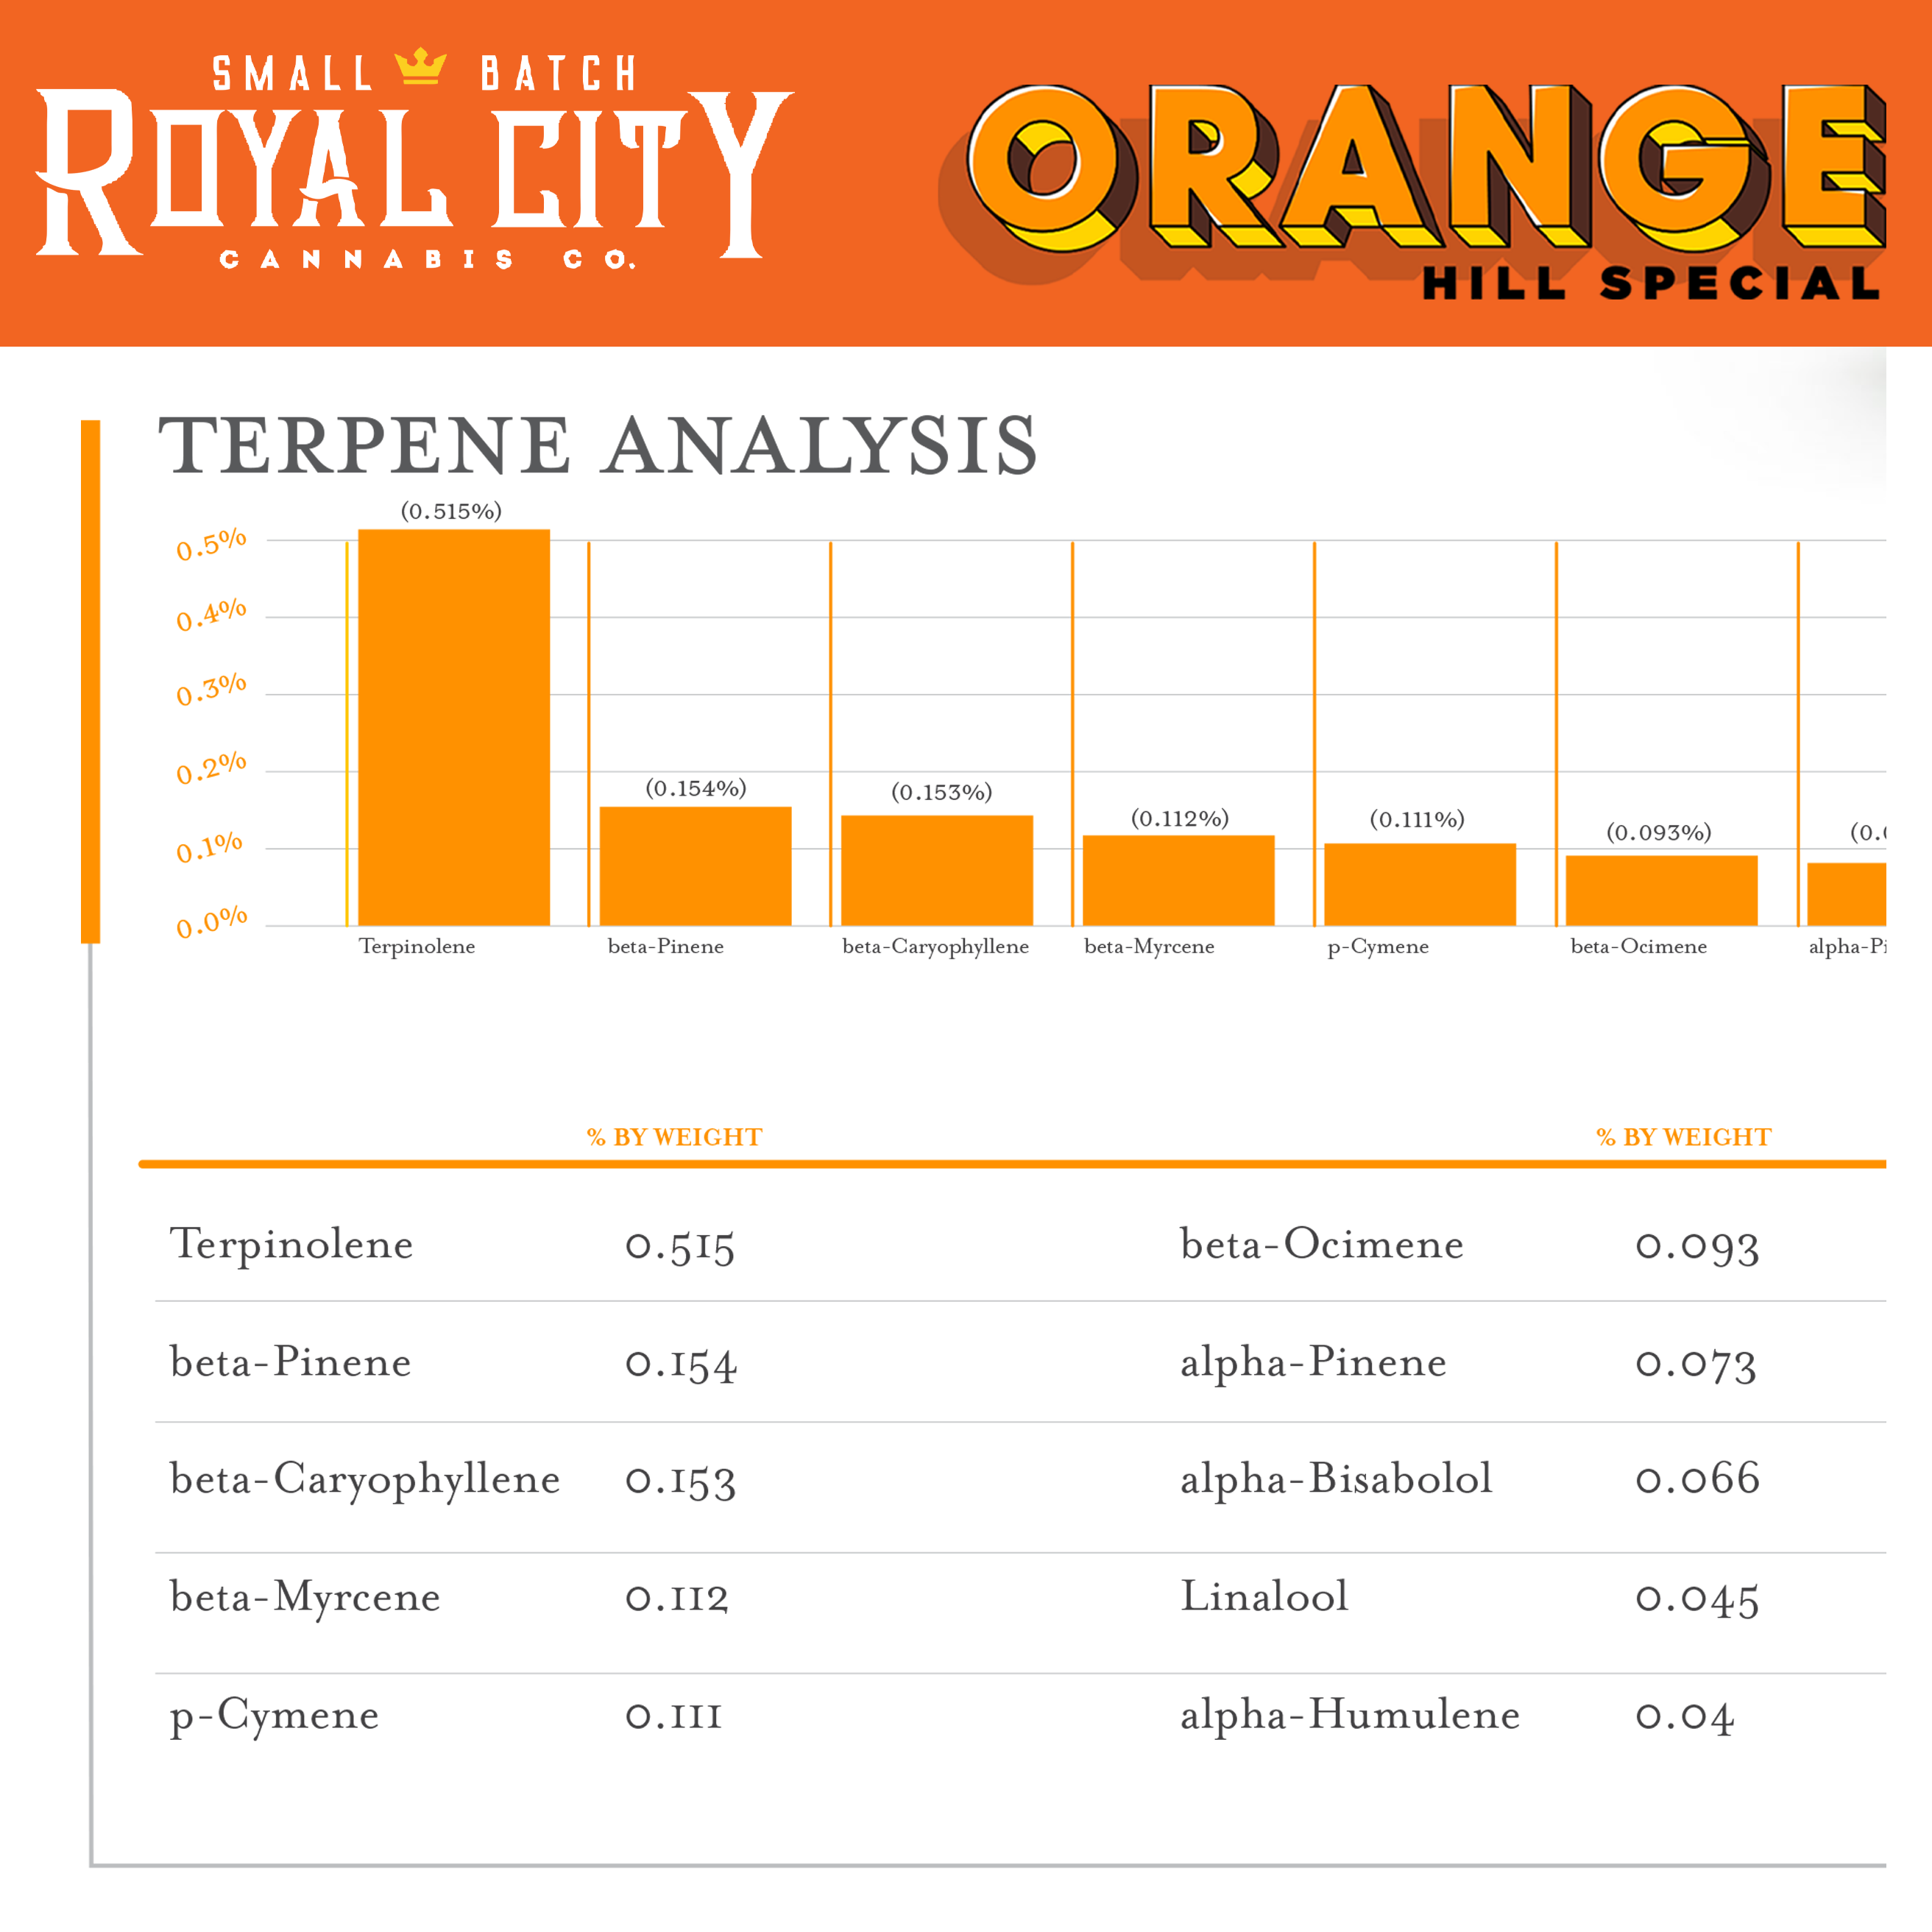 Royal City Cannabis - Orange Hill Special - Certificate of Analysis